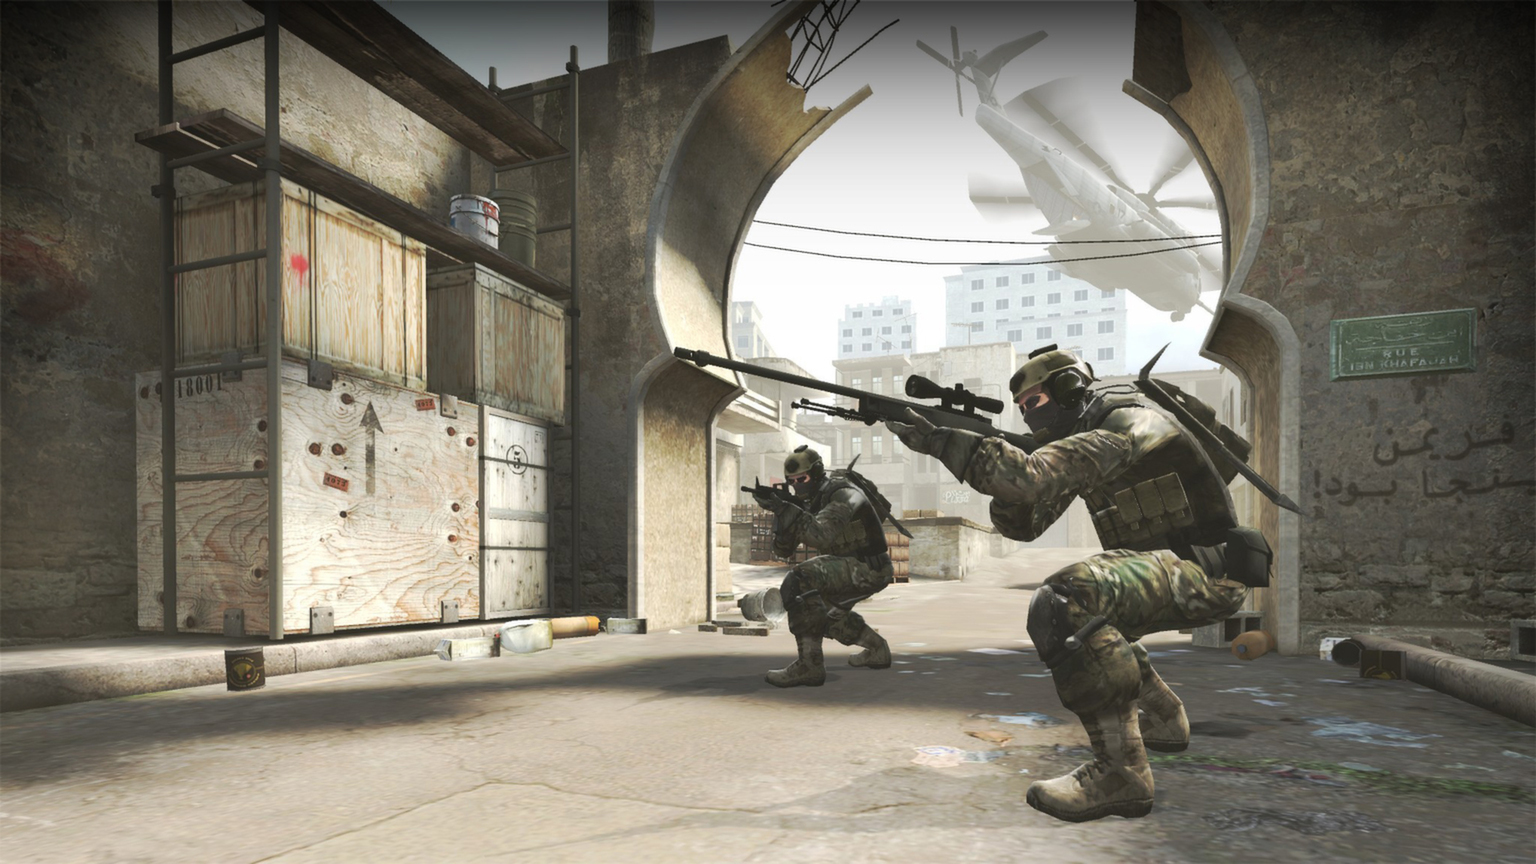 Buy cheap Counter-Strike: Global Offensive 2 cd key - lowest price